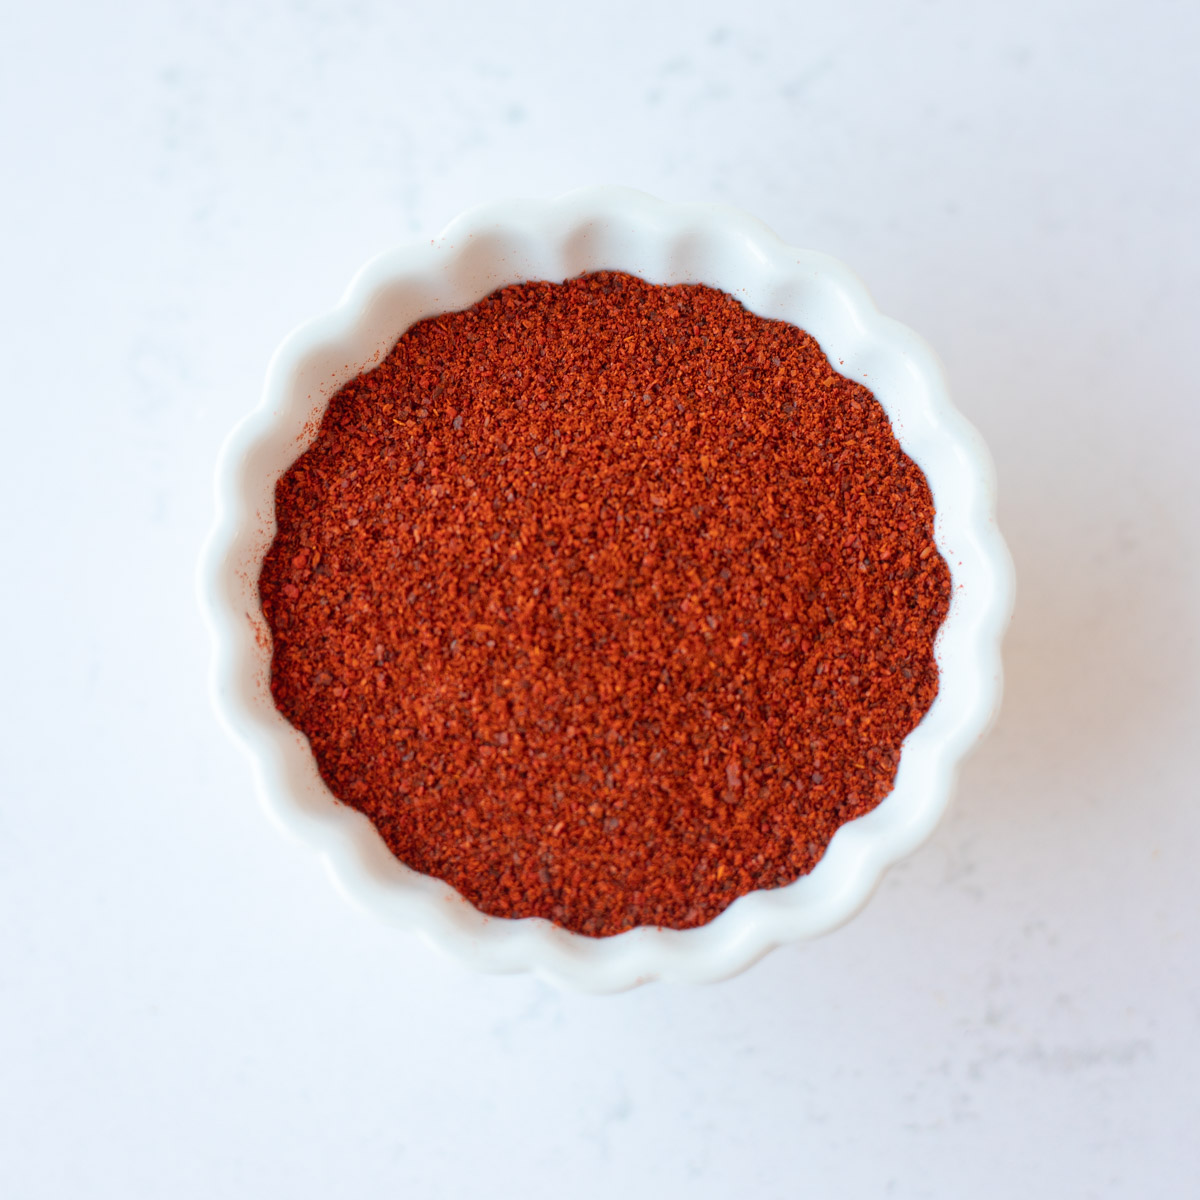 Red chili powder in a small white bowl.